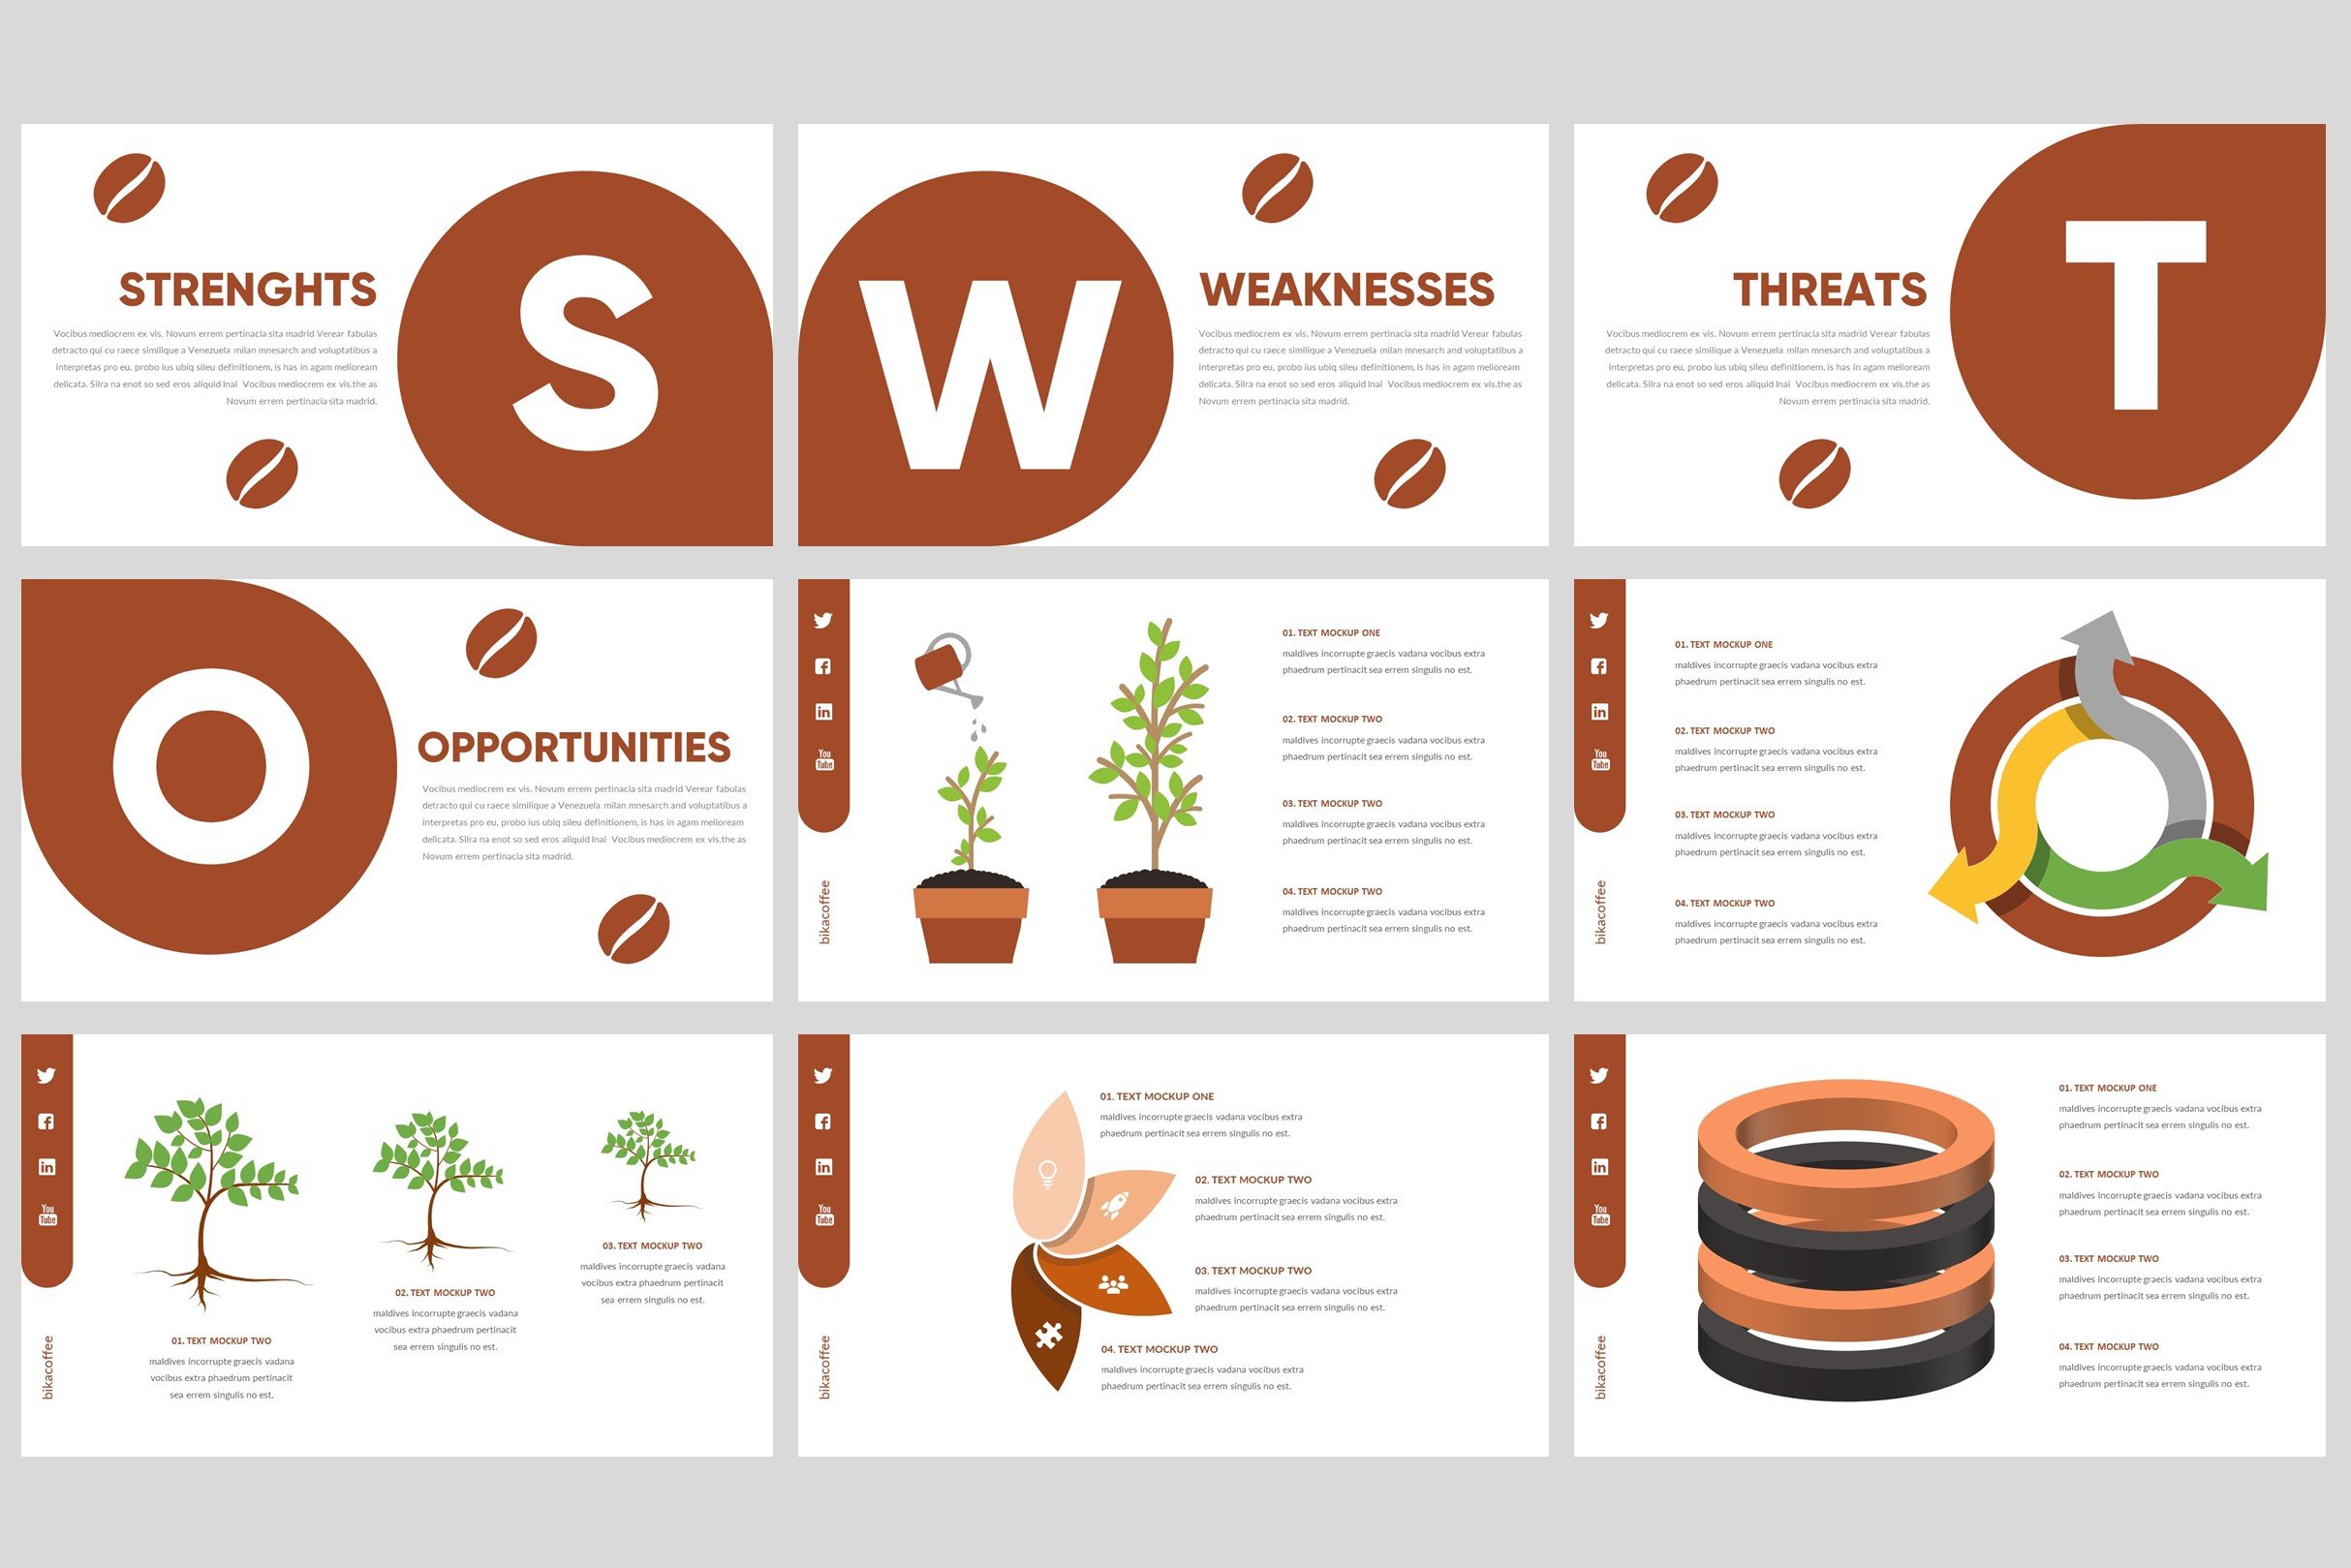 The template is tailored for marketing and offers the use of swot analysis.